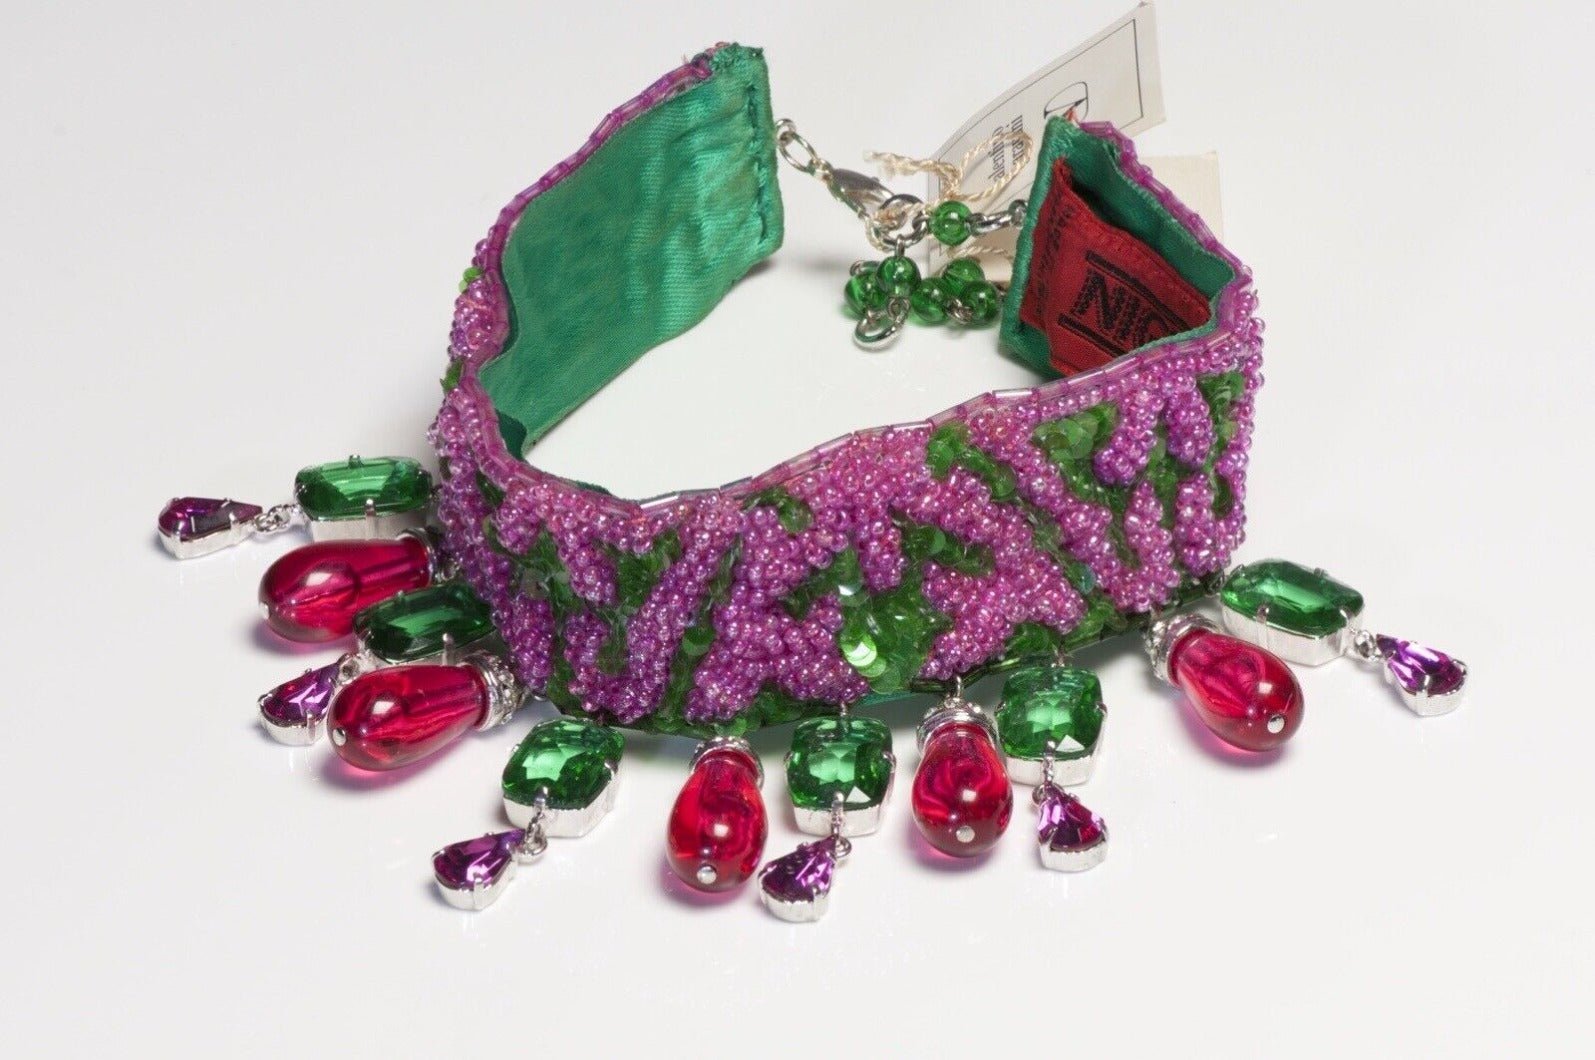 Valentino Couture 1990's Pink Crystal Beads Green Sequin Choker Necklace